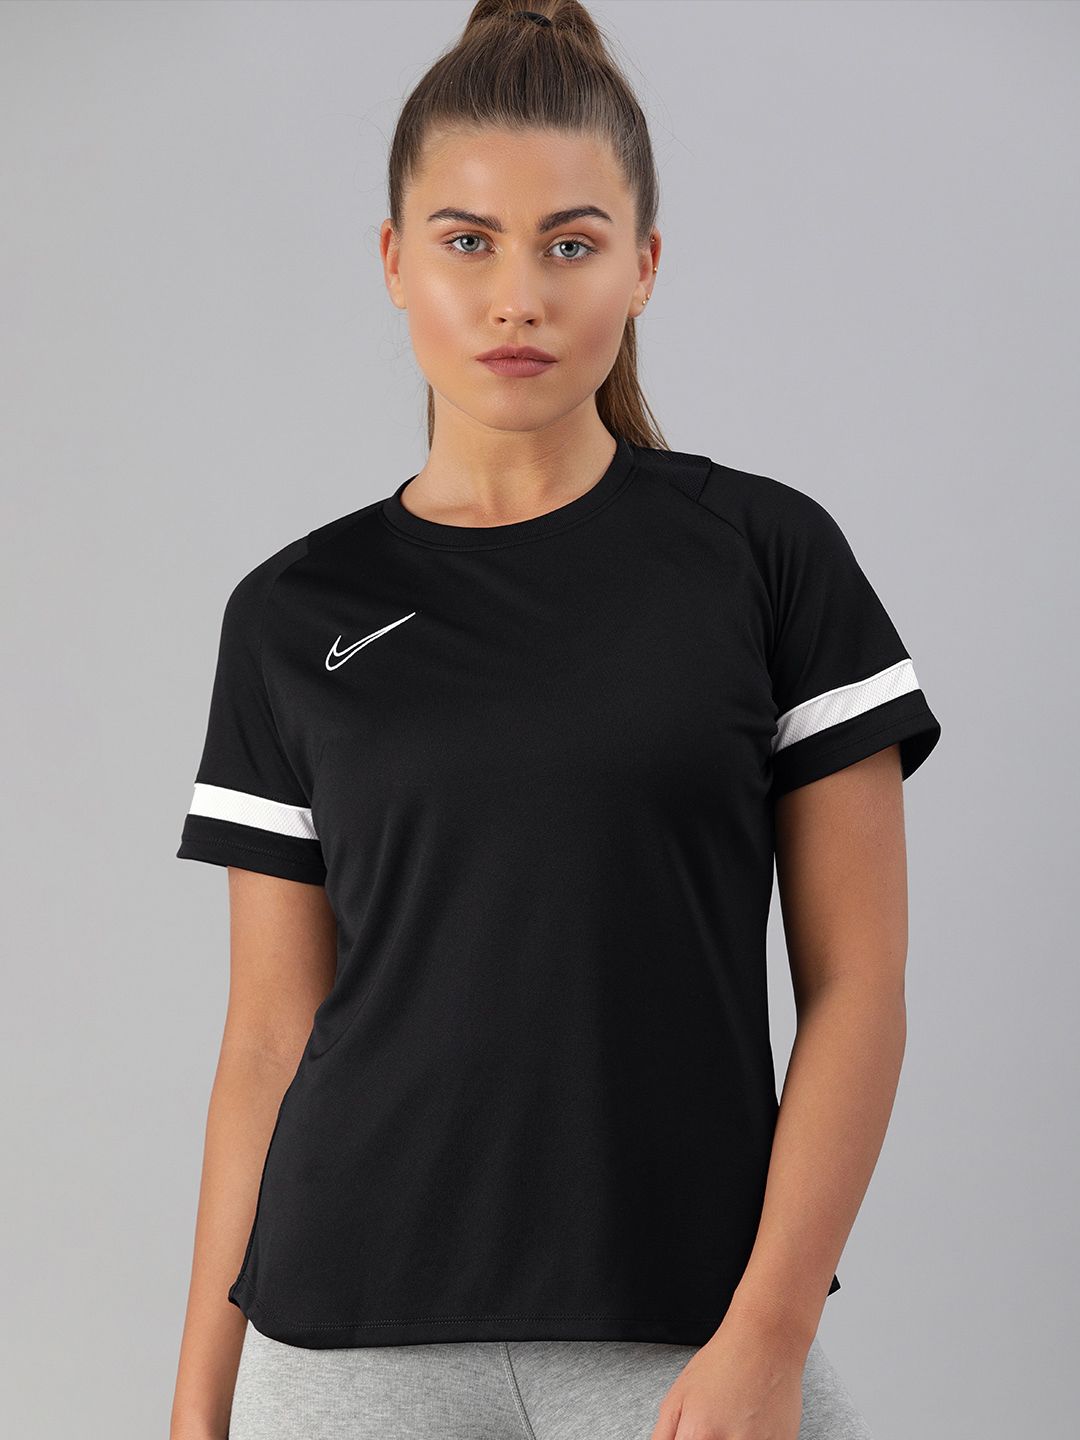 Nike Women Black Solid DF ACD21 Football Round Neck T-shirt Price in India